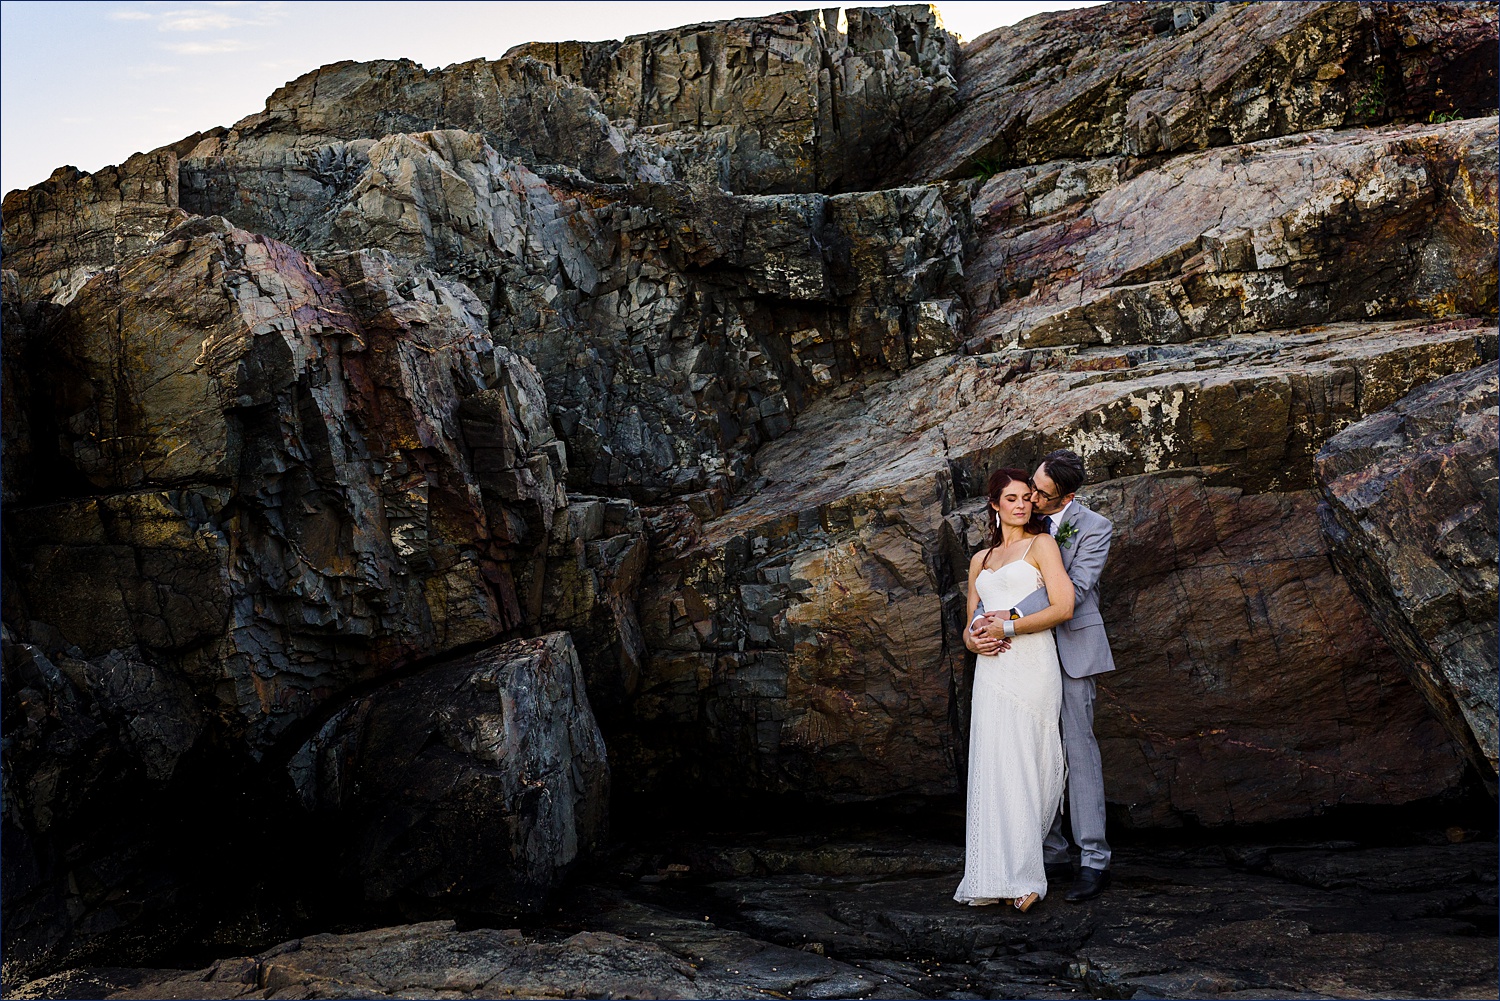 Huddling in the shade of the giant rock walls in Ogunquit beach Maine after eloping